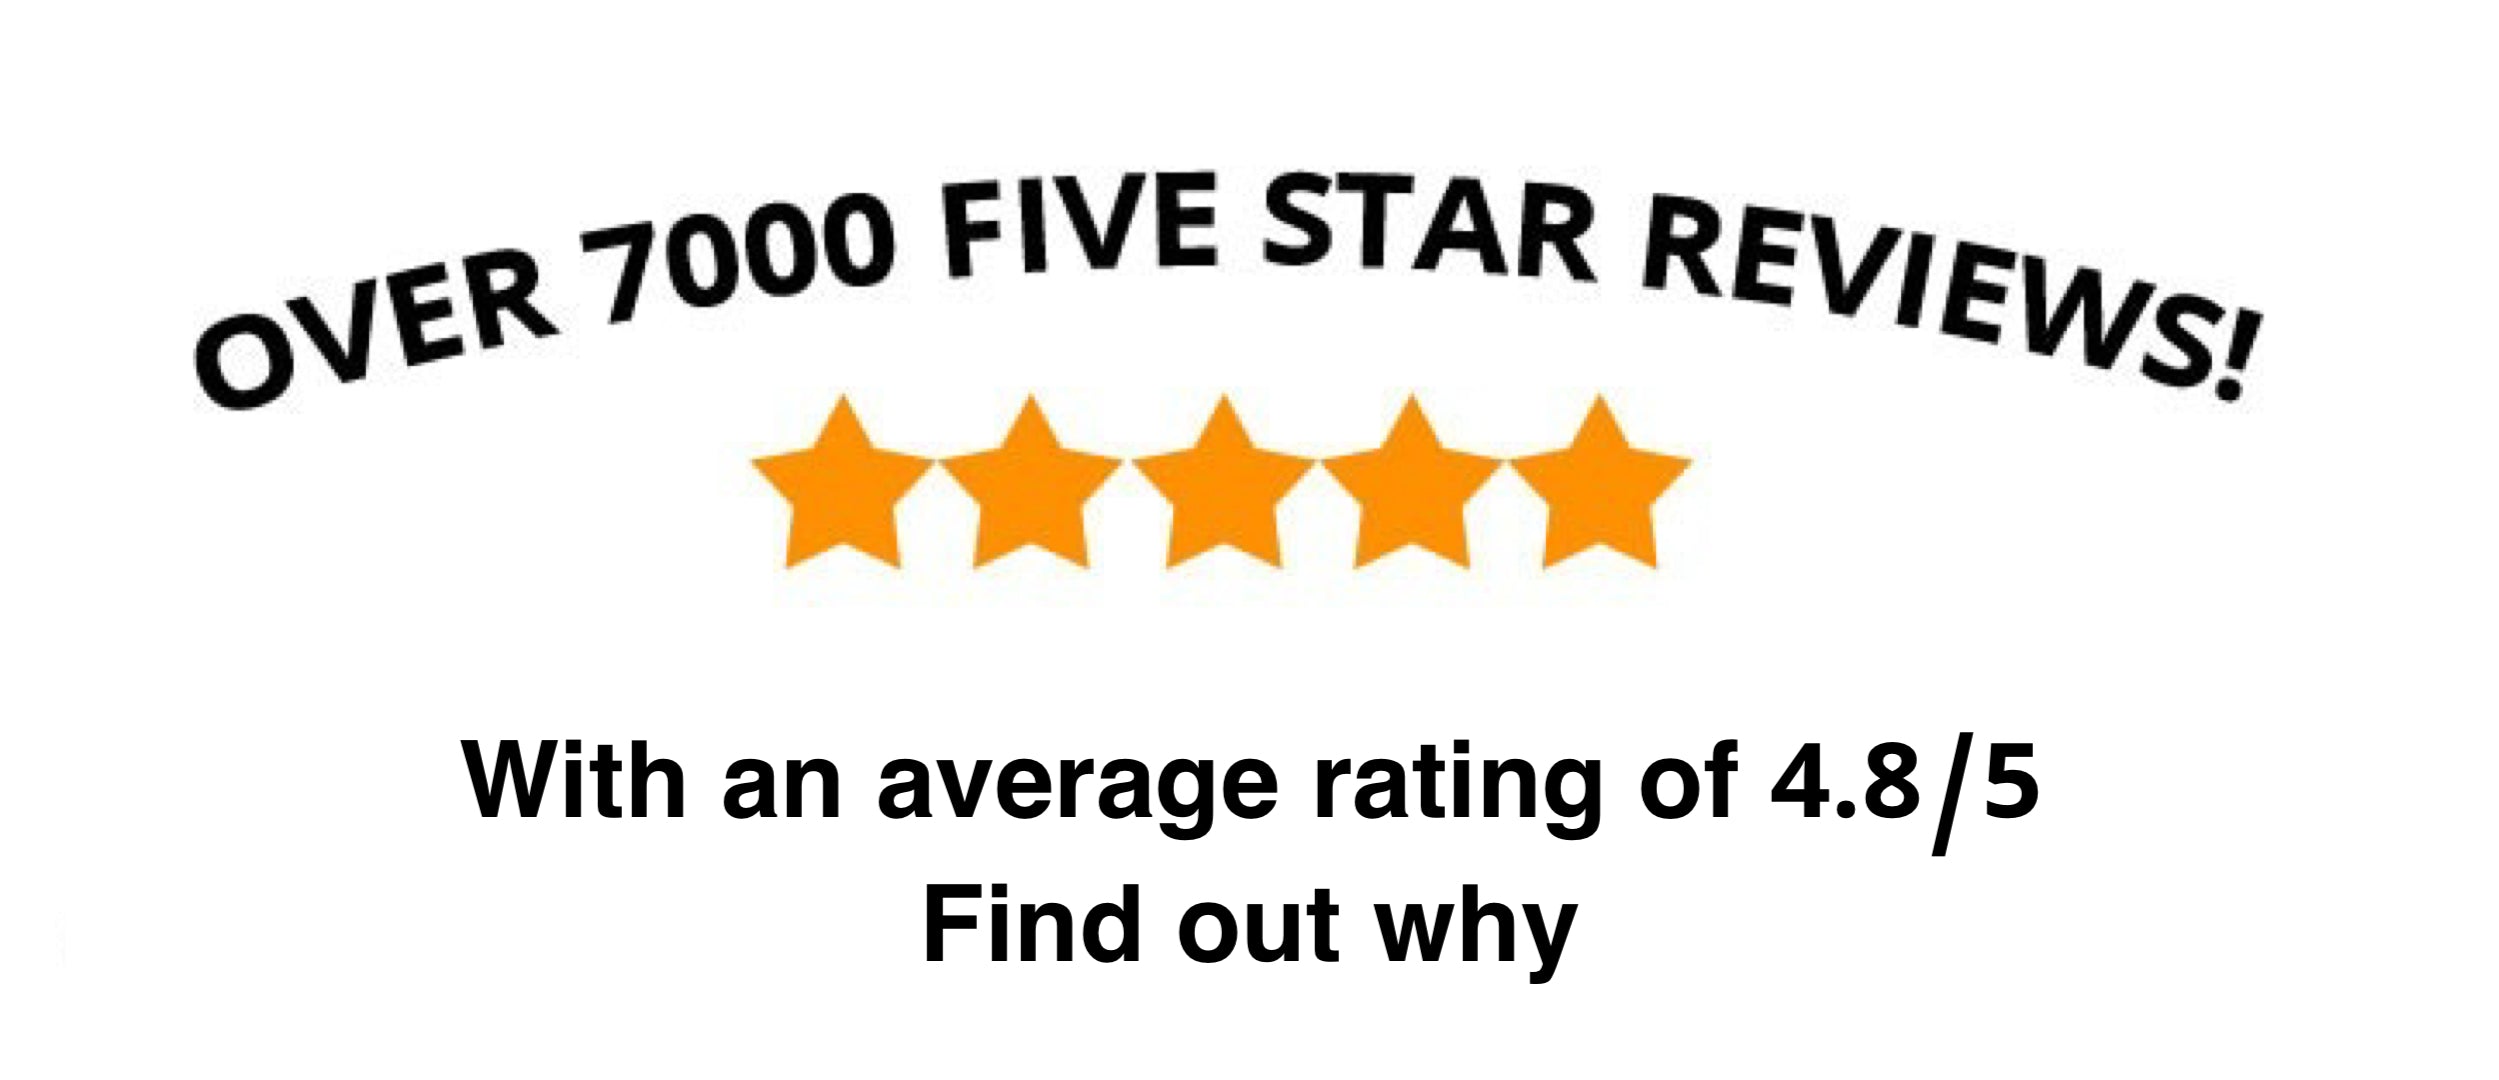 Variety Gifts - We’re Rated 4.8/5 With 7000 Five Star Reviews